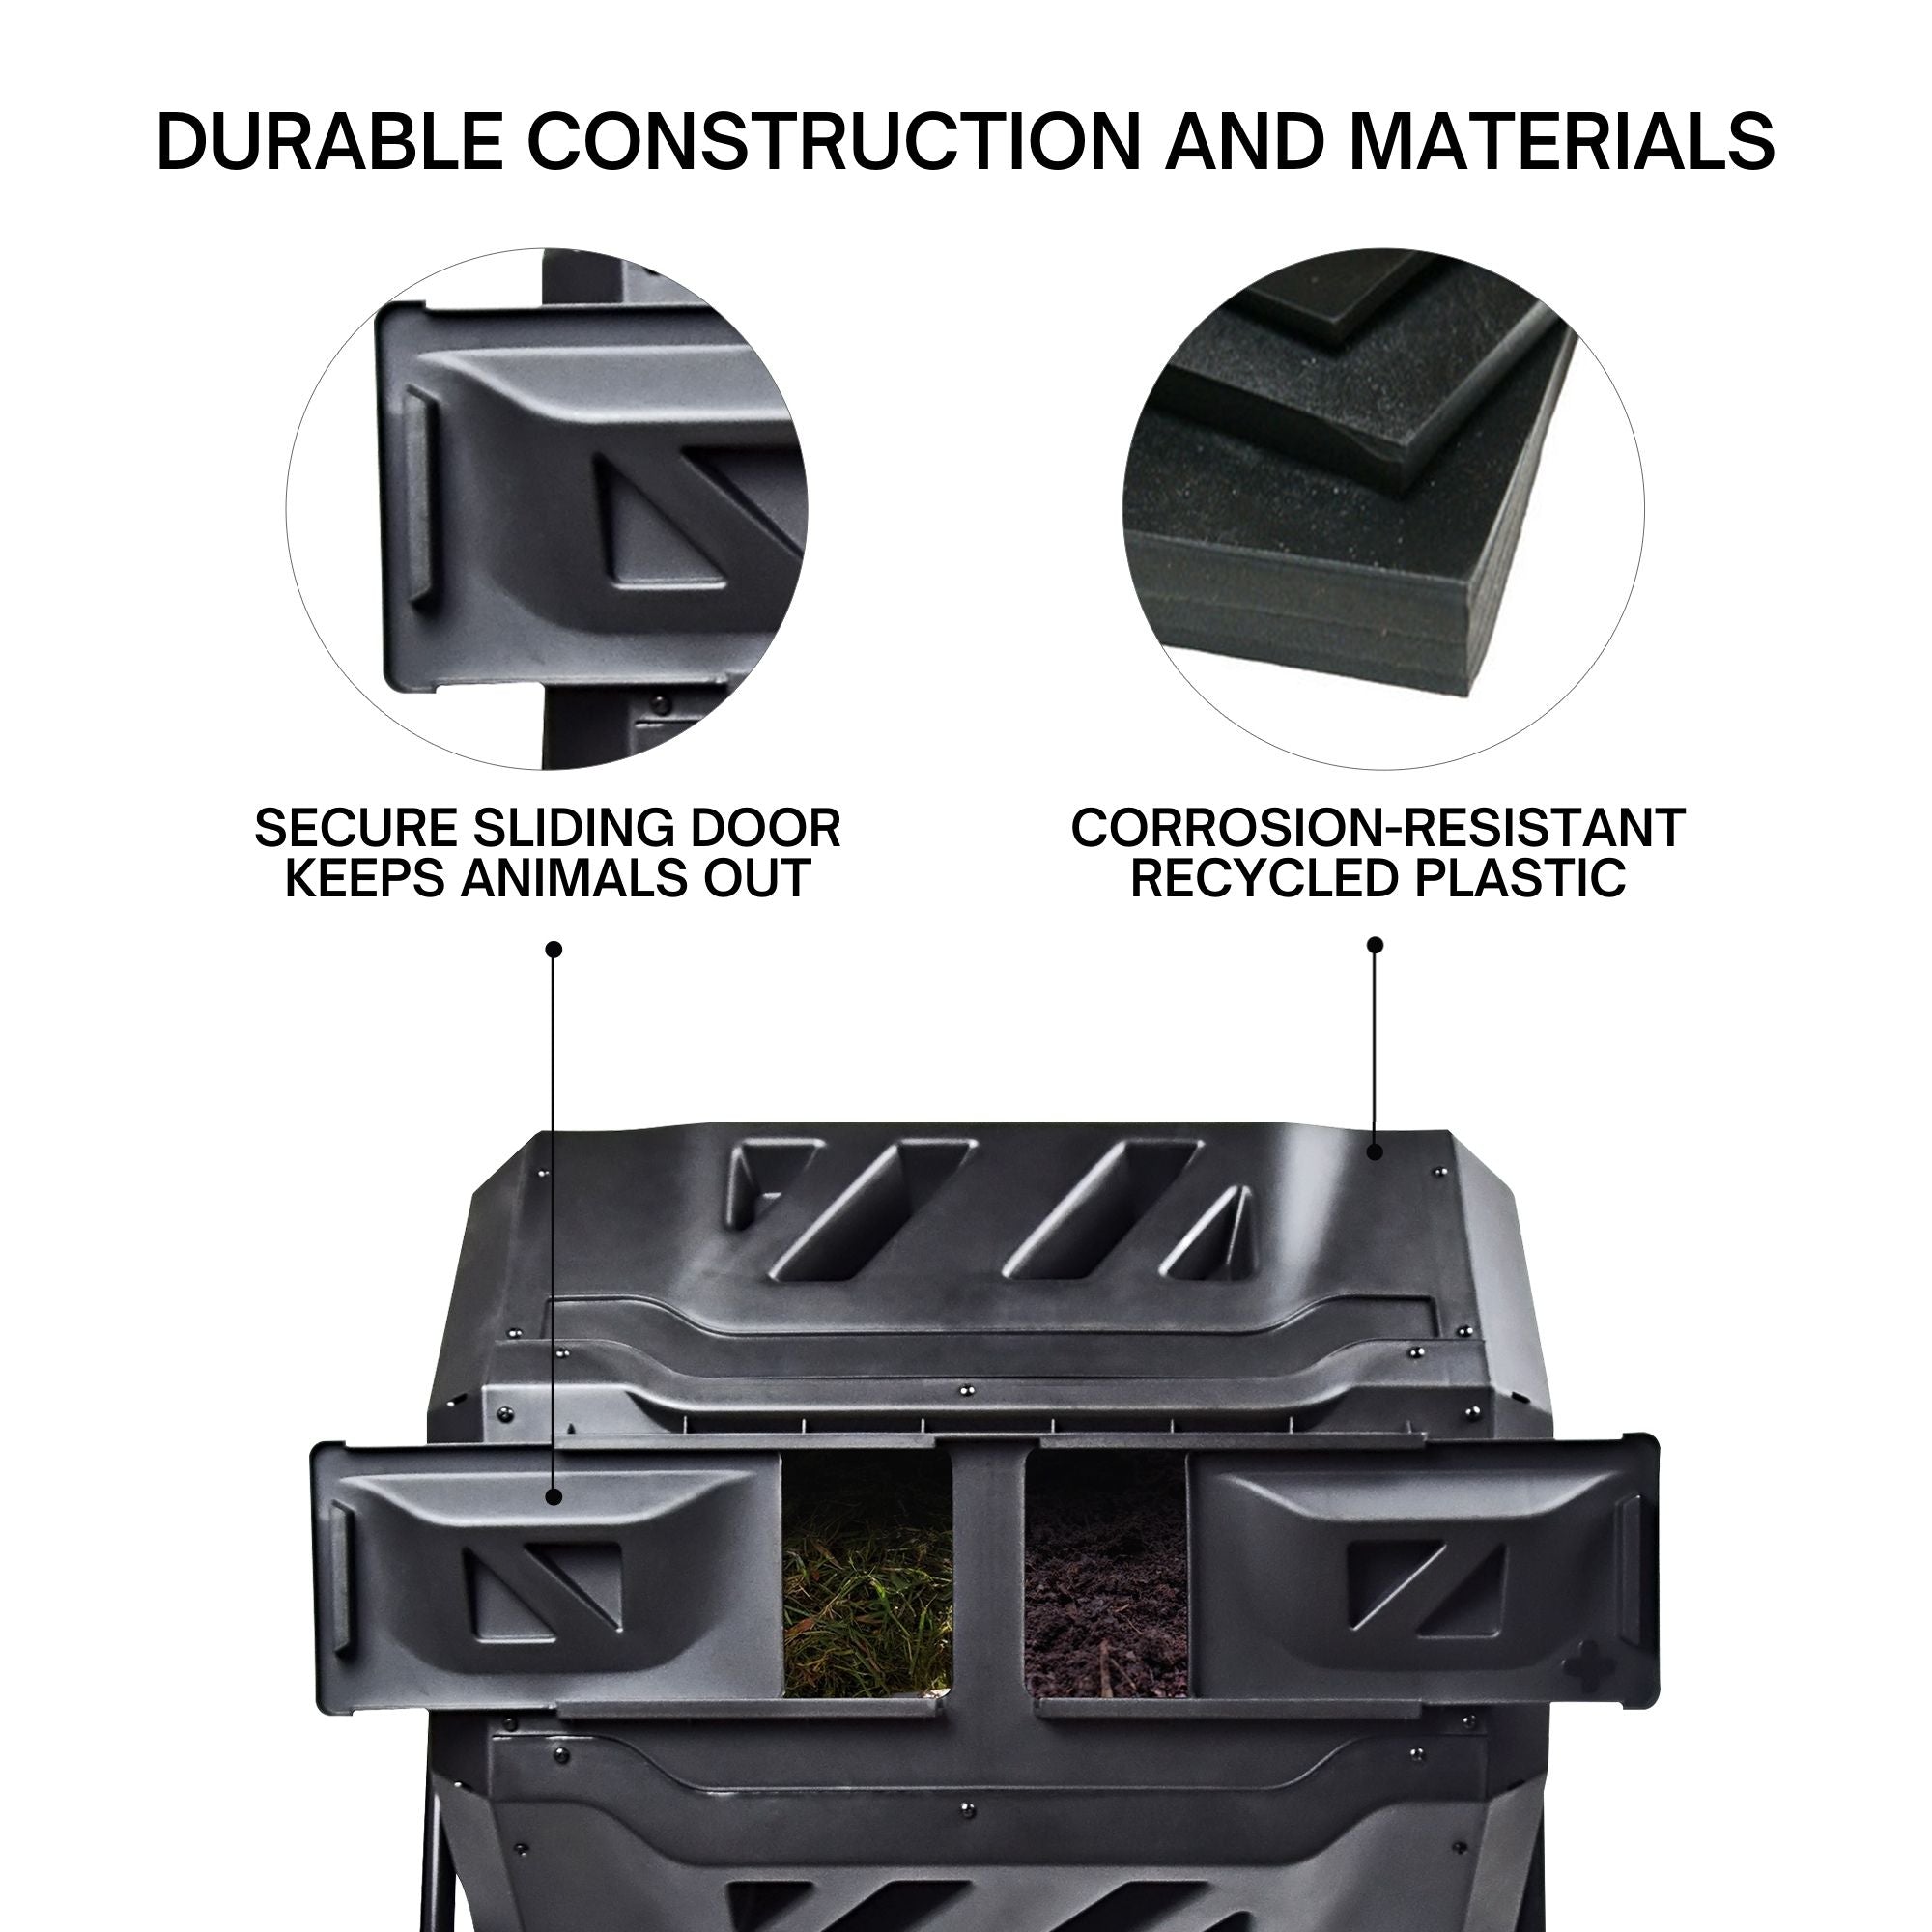 Closeup product shot of twin chamber tumbling composter with both sides partly open and compost inside. Text at the top reads, "Durable construction and materials," and inset closeups are labeled, "Secure sliding door keeps animals out," and "corrosion-resistant recycled plastic"